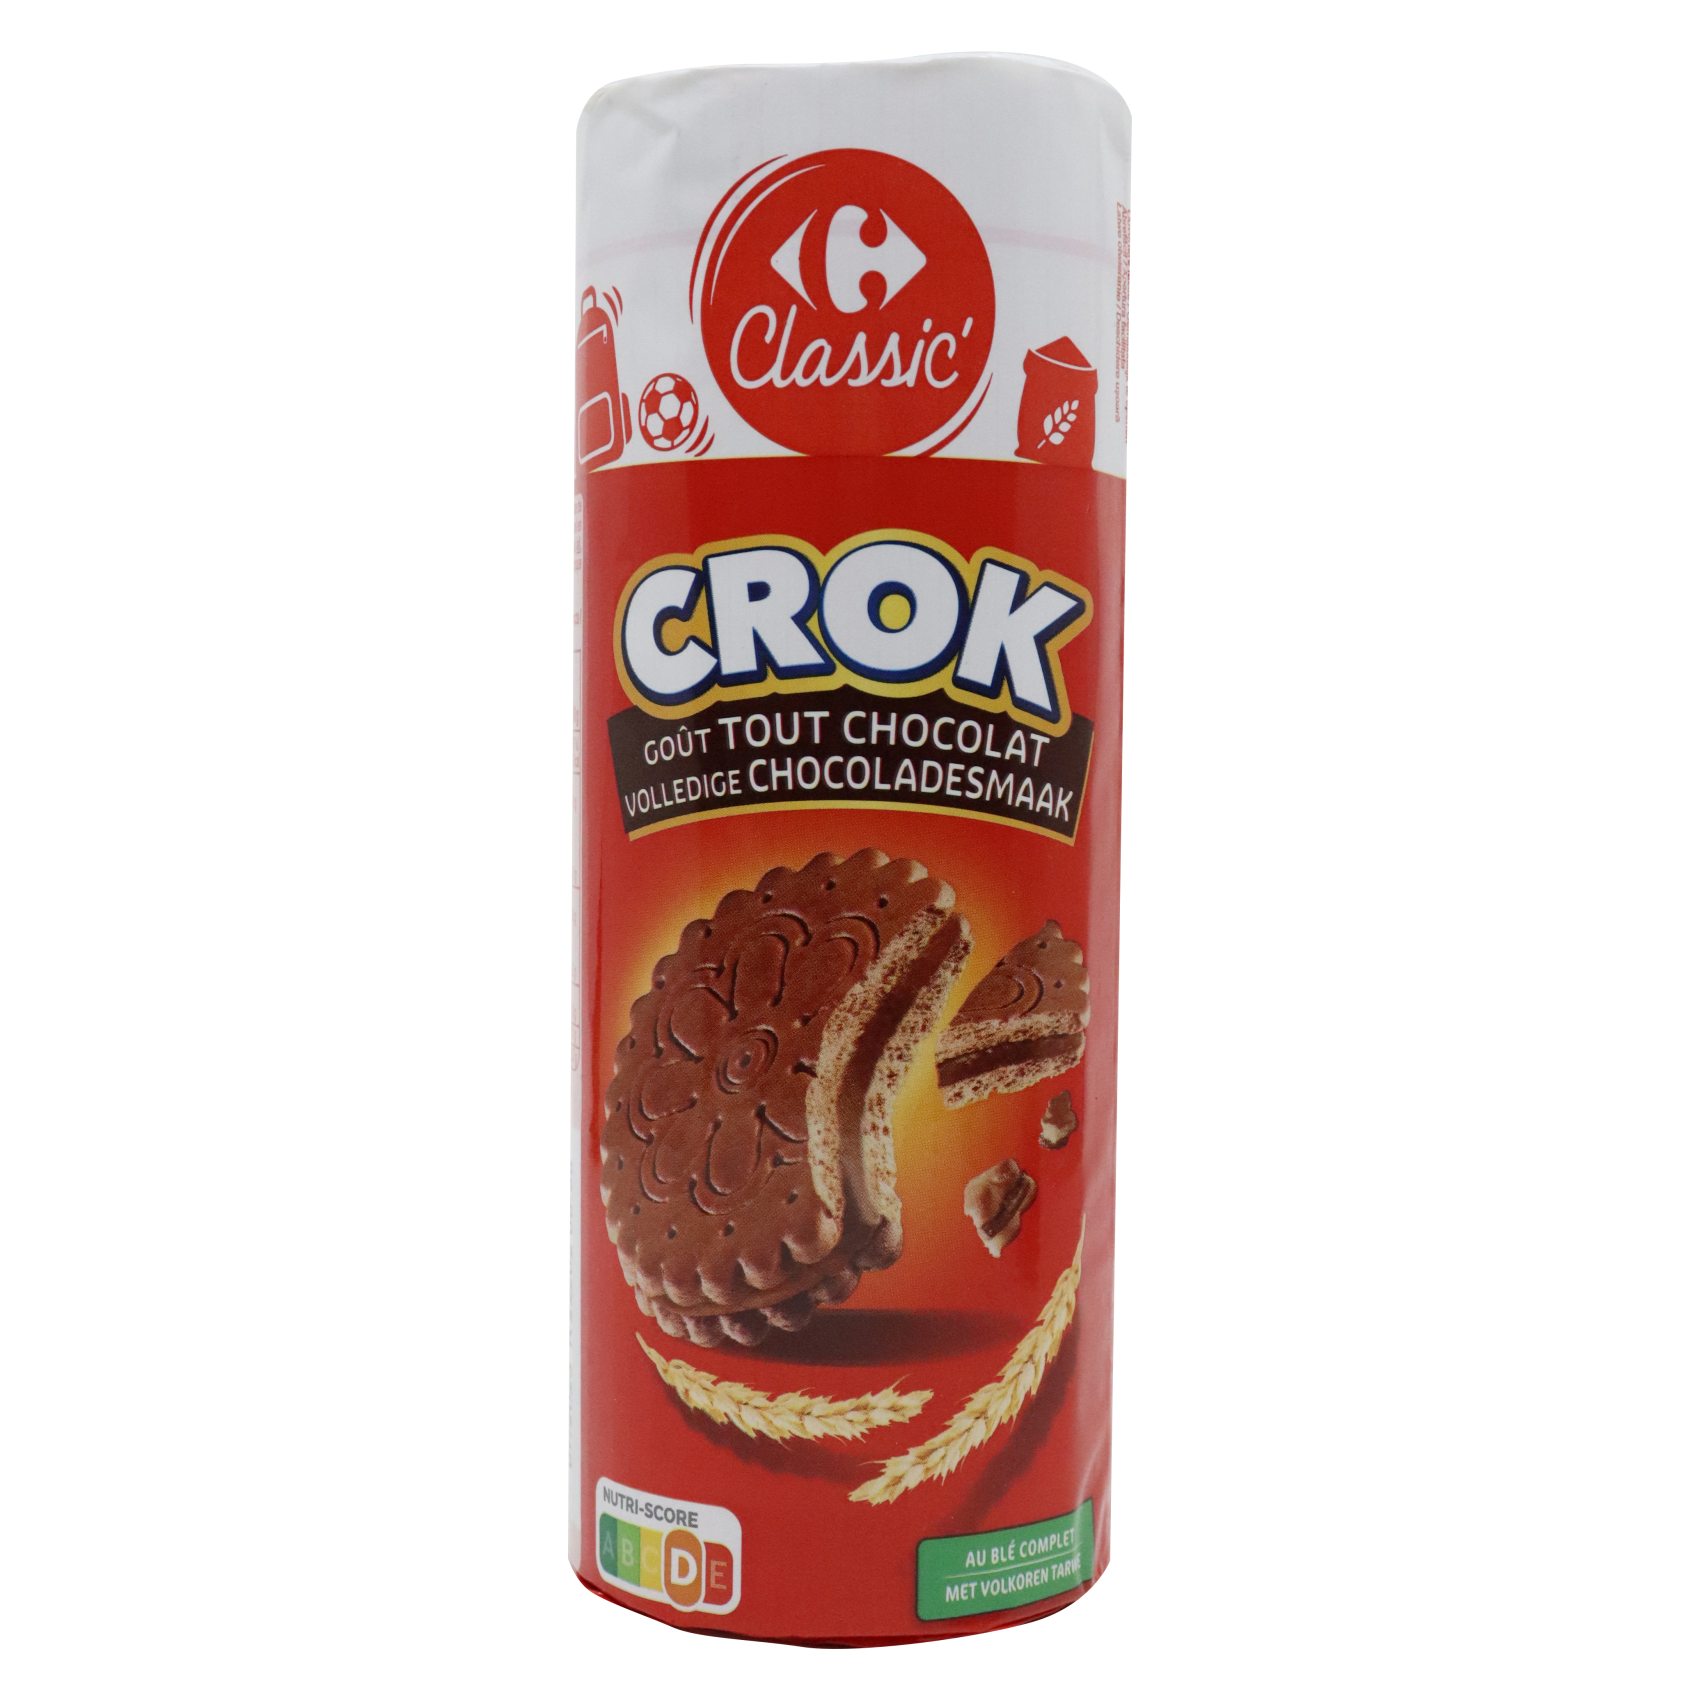 Carrefour Classic Filed Choc Biscuit 300g